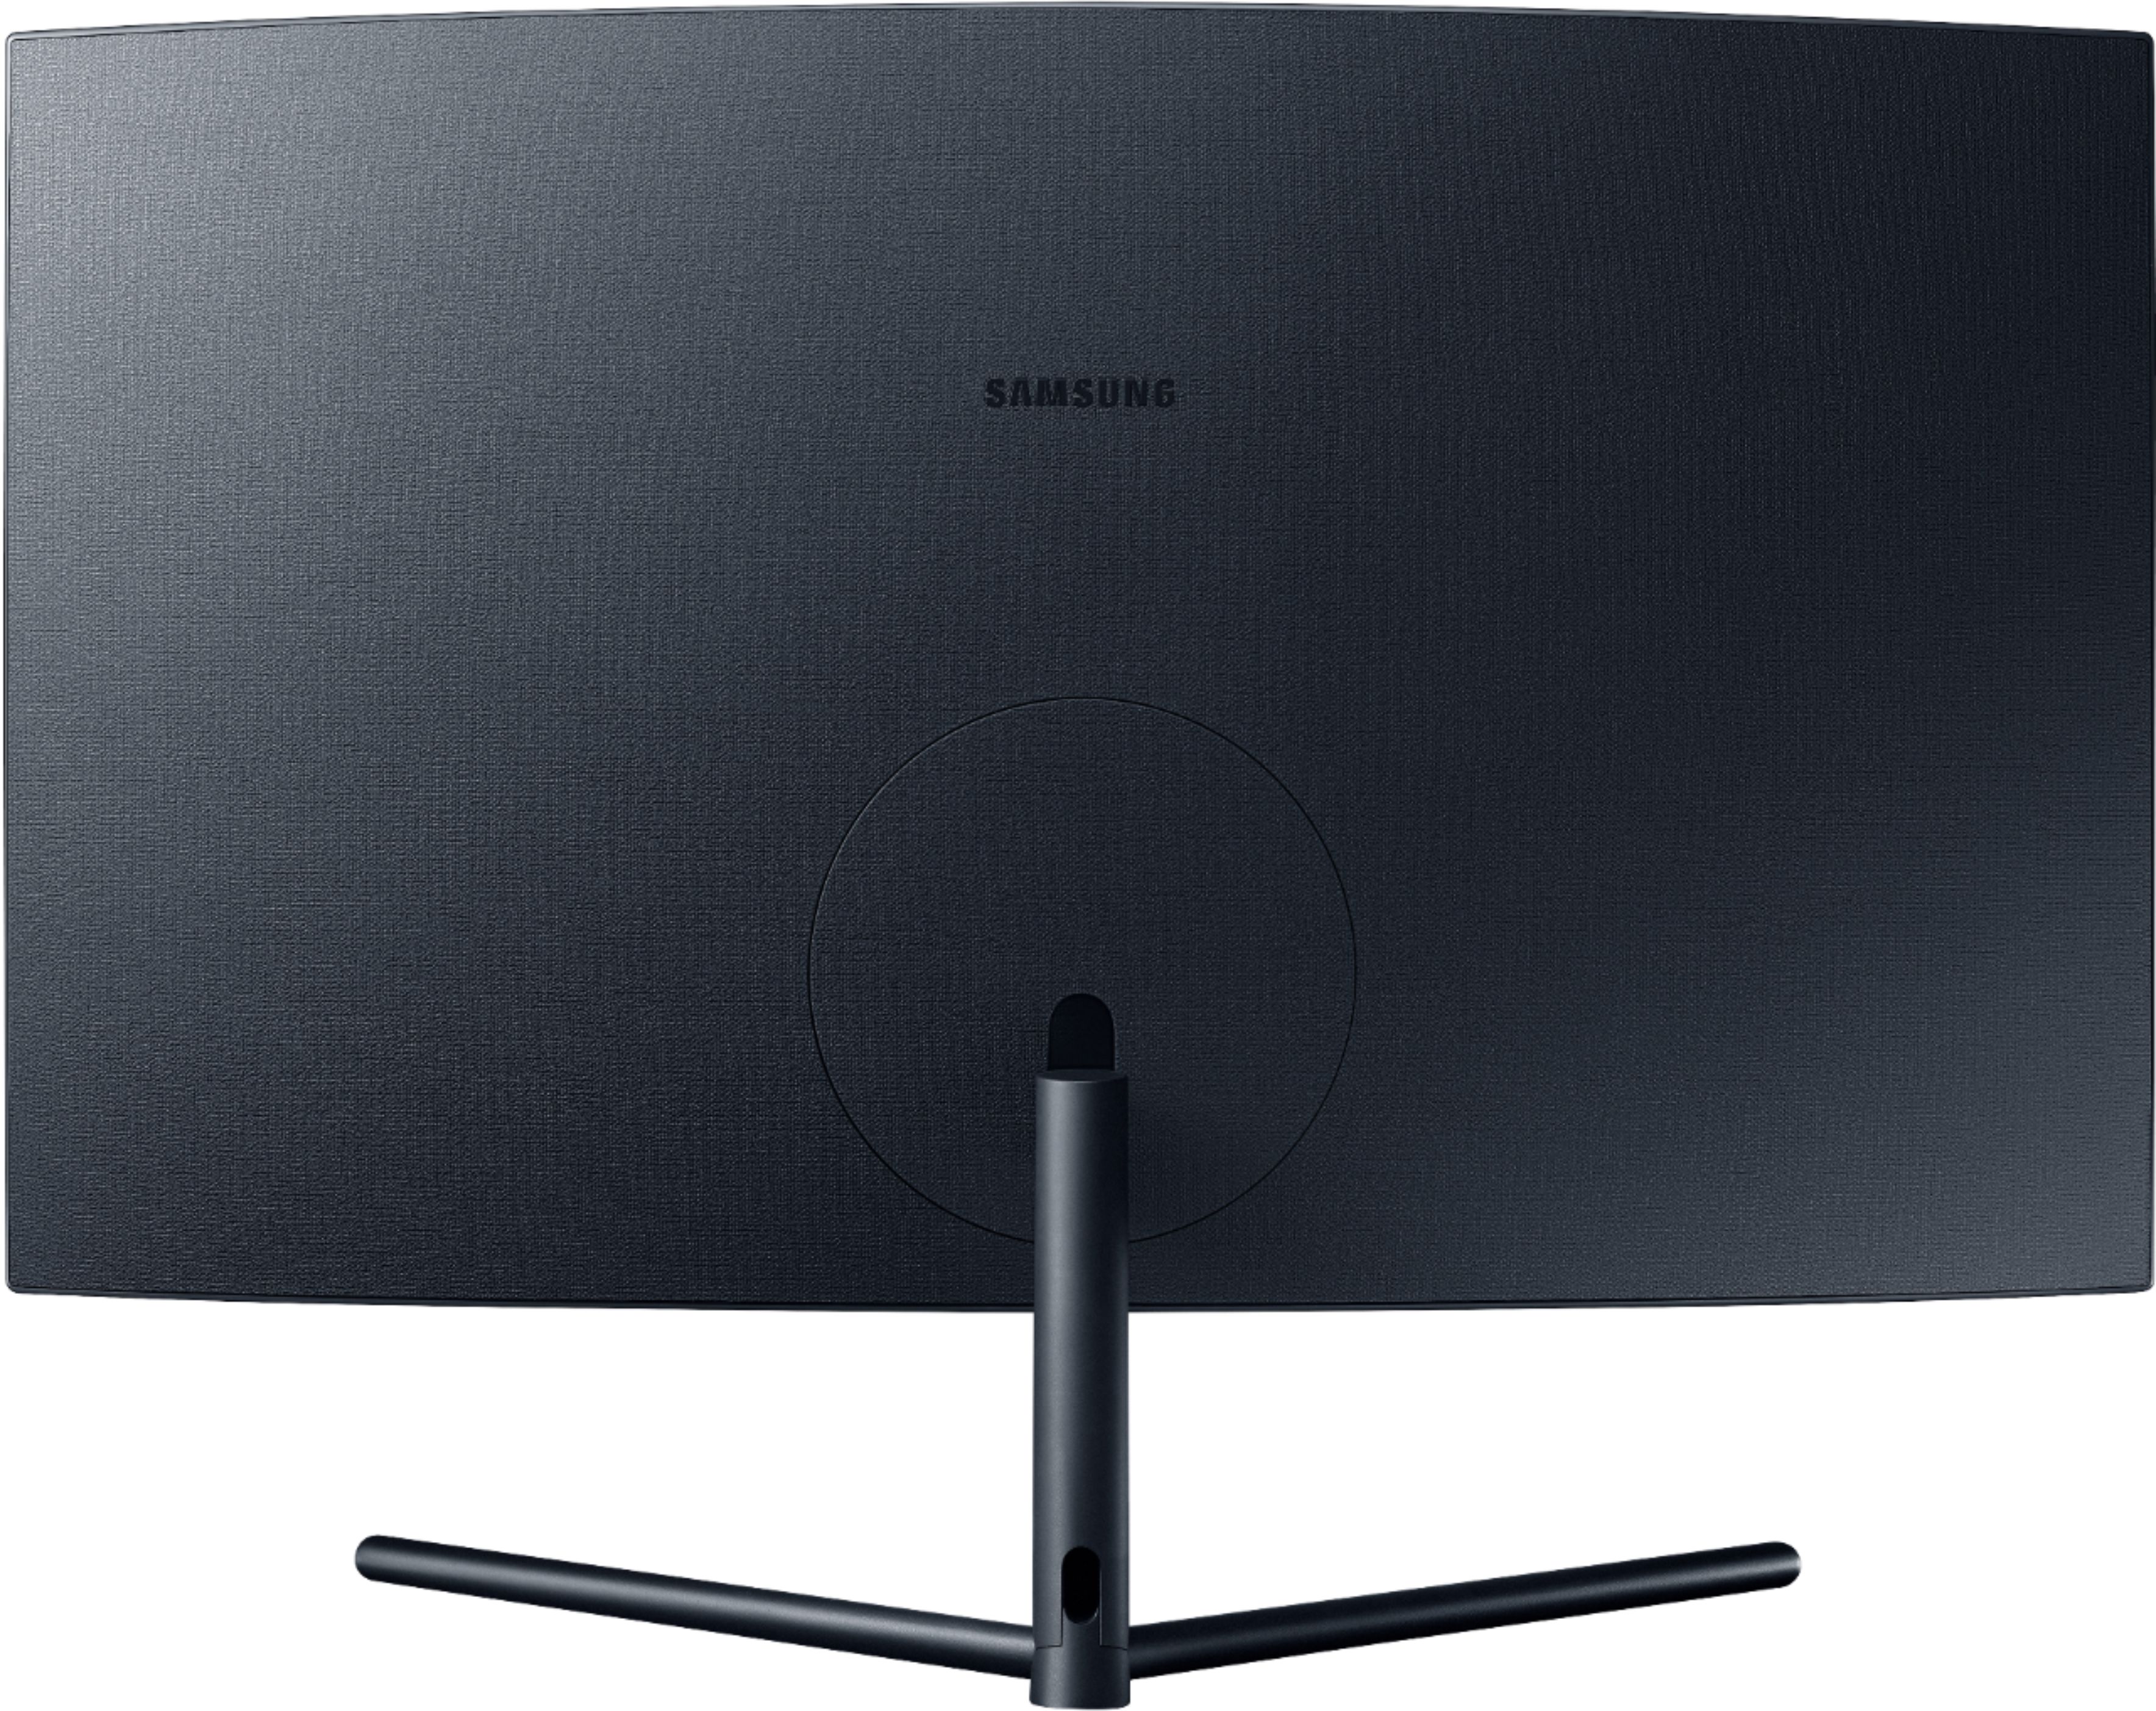 Back View: Samsung - S60A Series 32” QHD Monitor with HDR (HDMI, USB) - Black